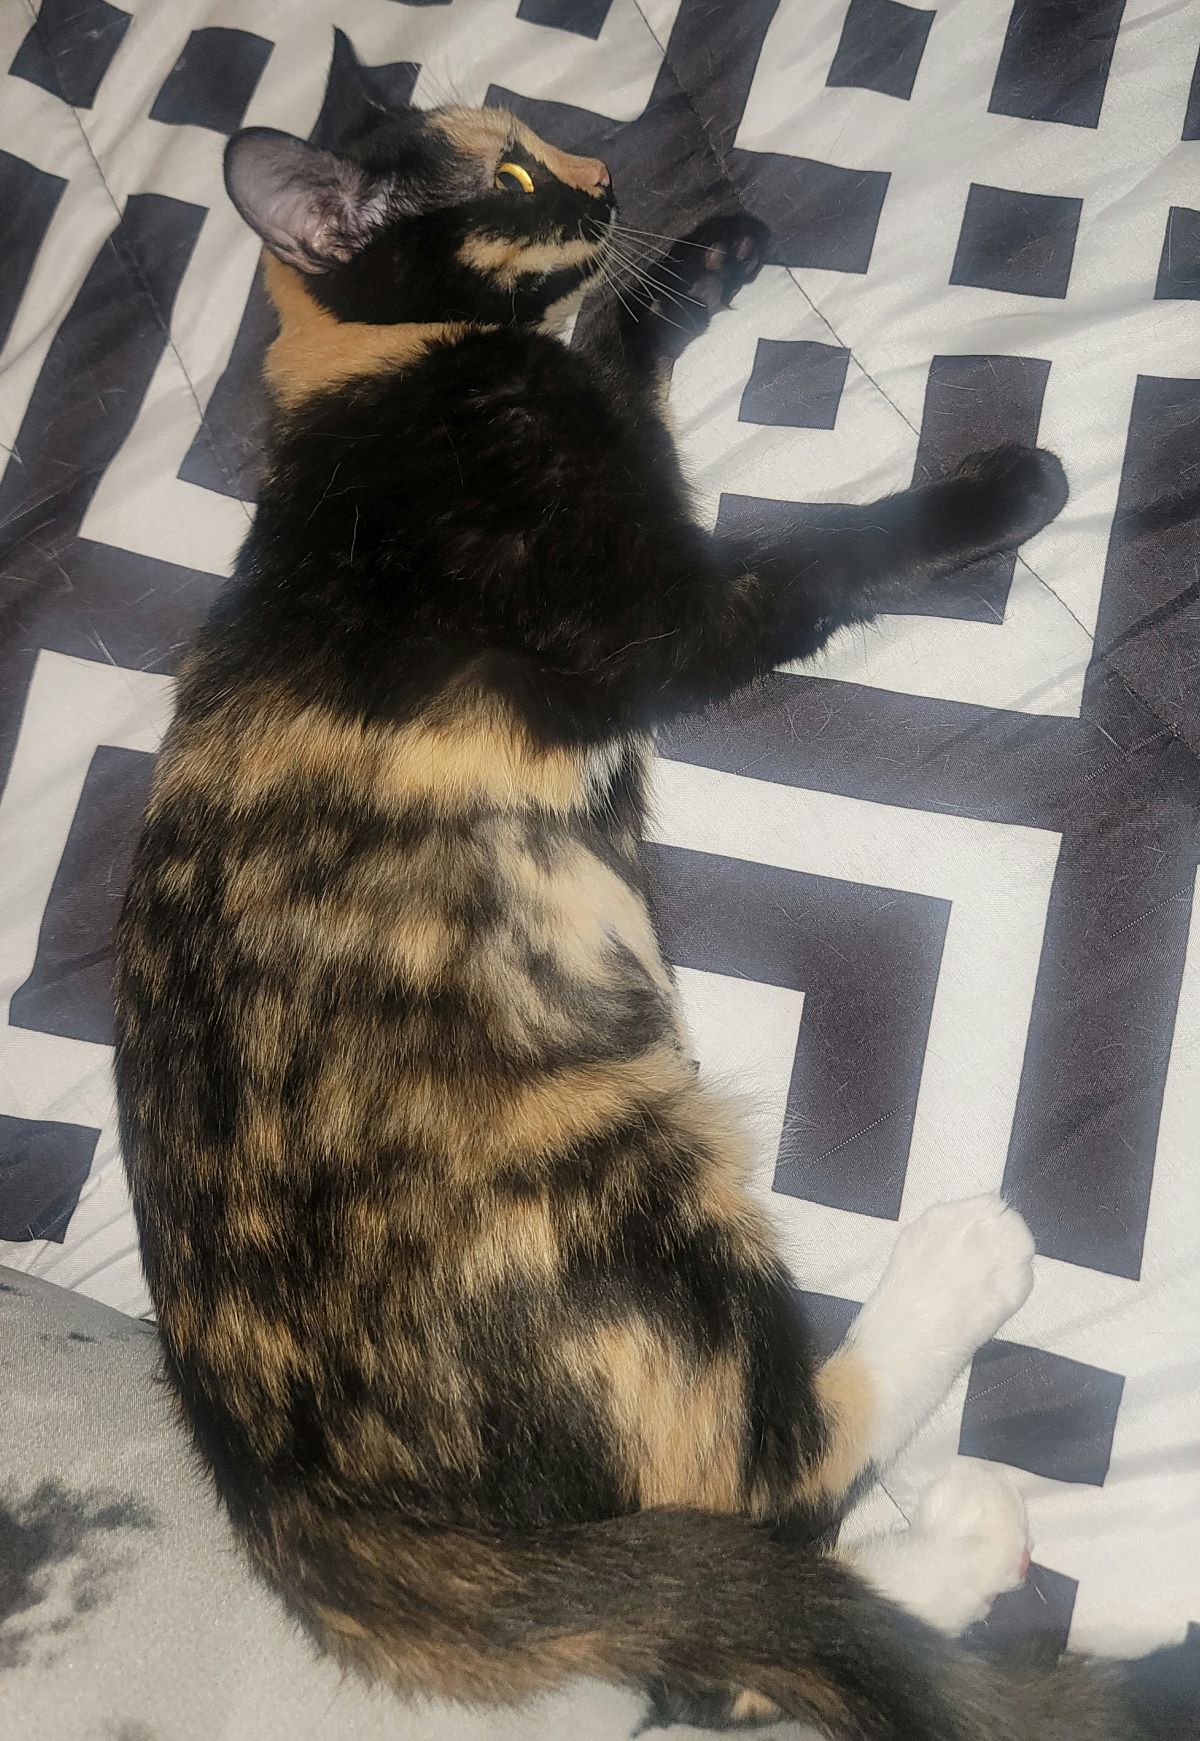 My cat's right side looks like she's wearing an outfit.